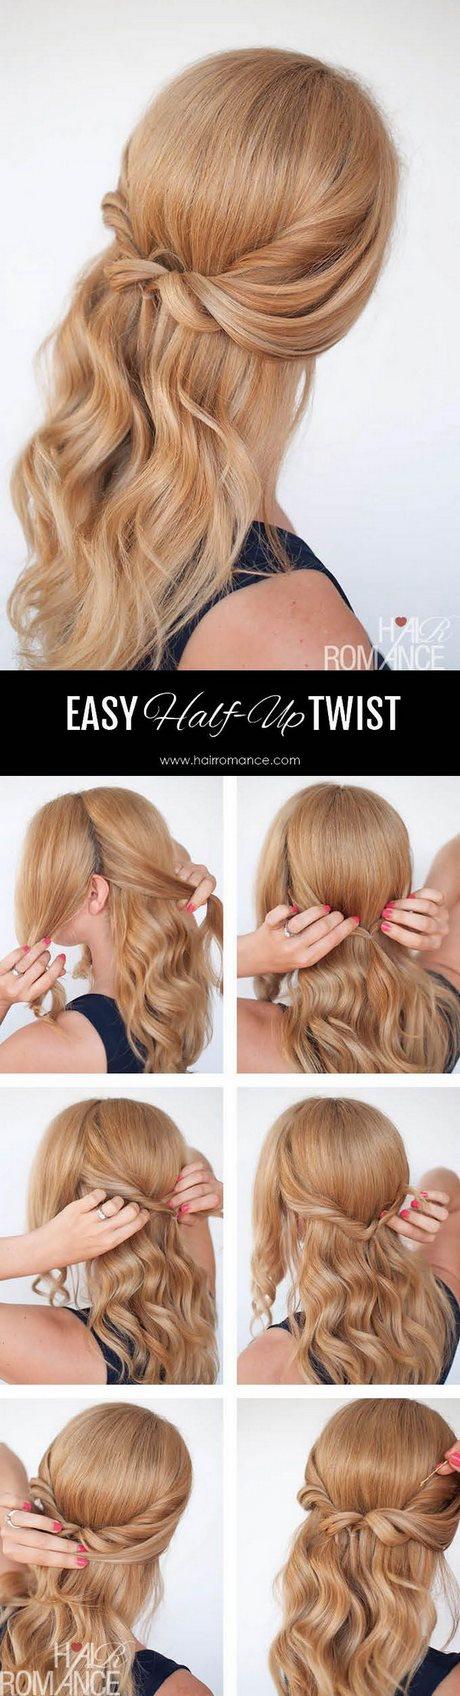 Easy half up half down hairstyles for medium hair easy-half-up-half-down-hairstyles-for-medium-hair-91_18